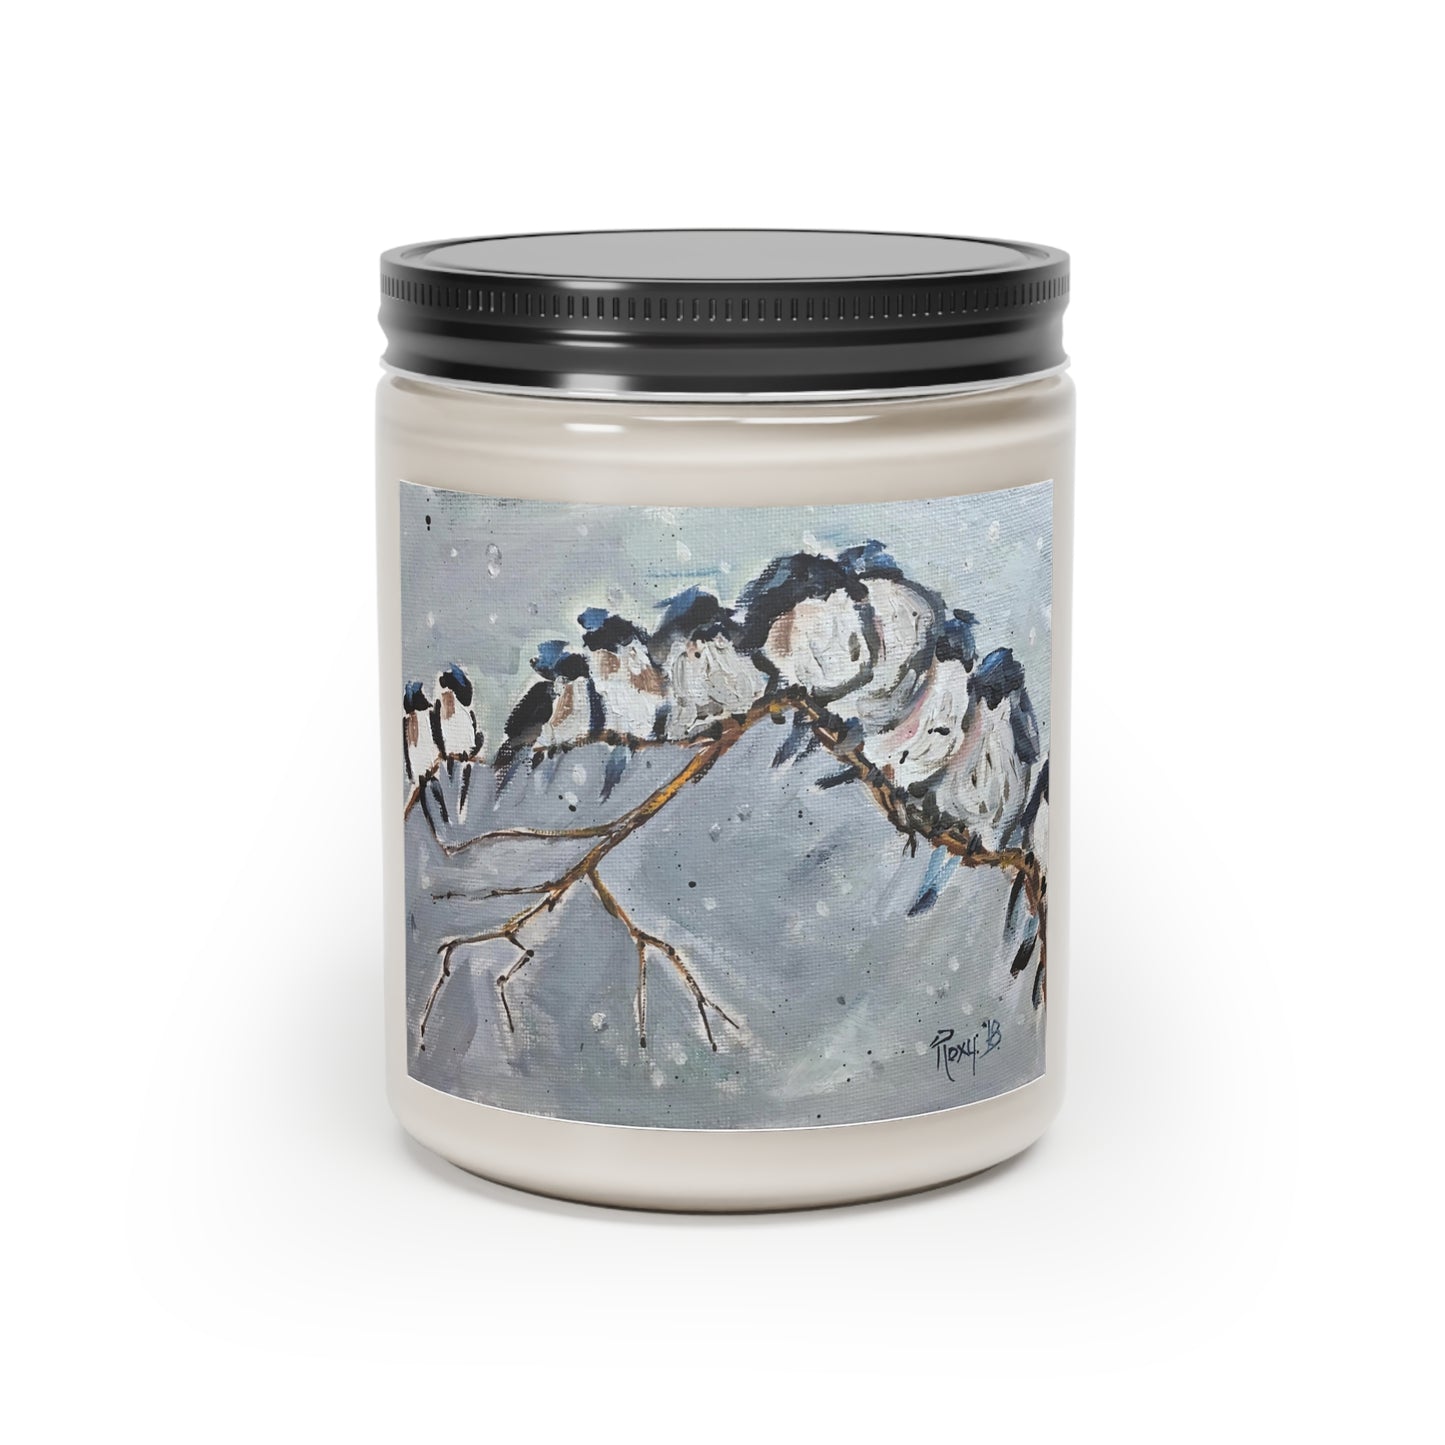 Group Hug Wrens on a Snowy Branch Candle